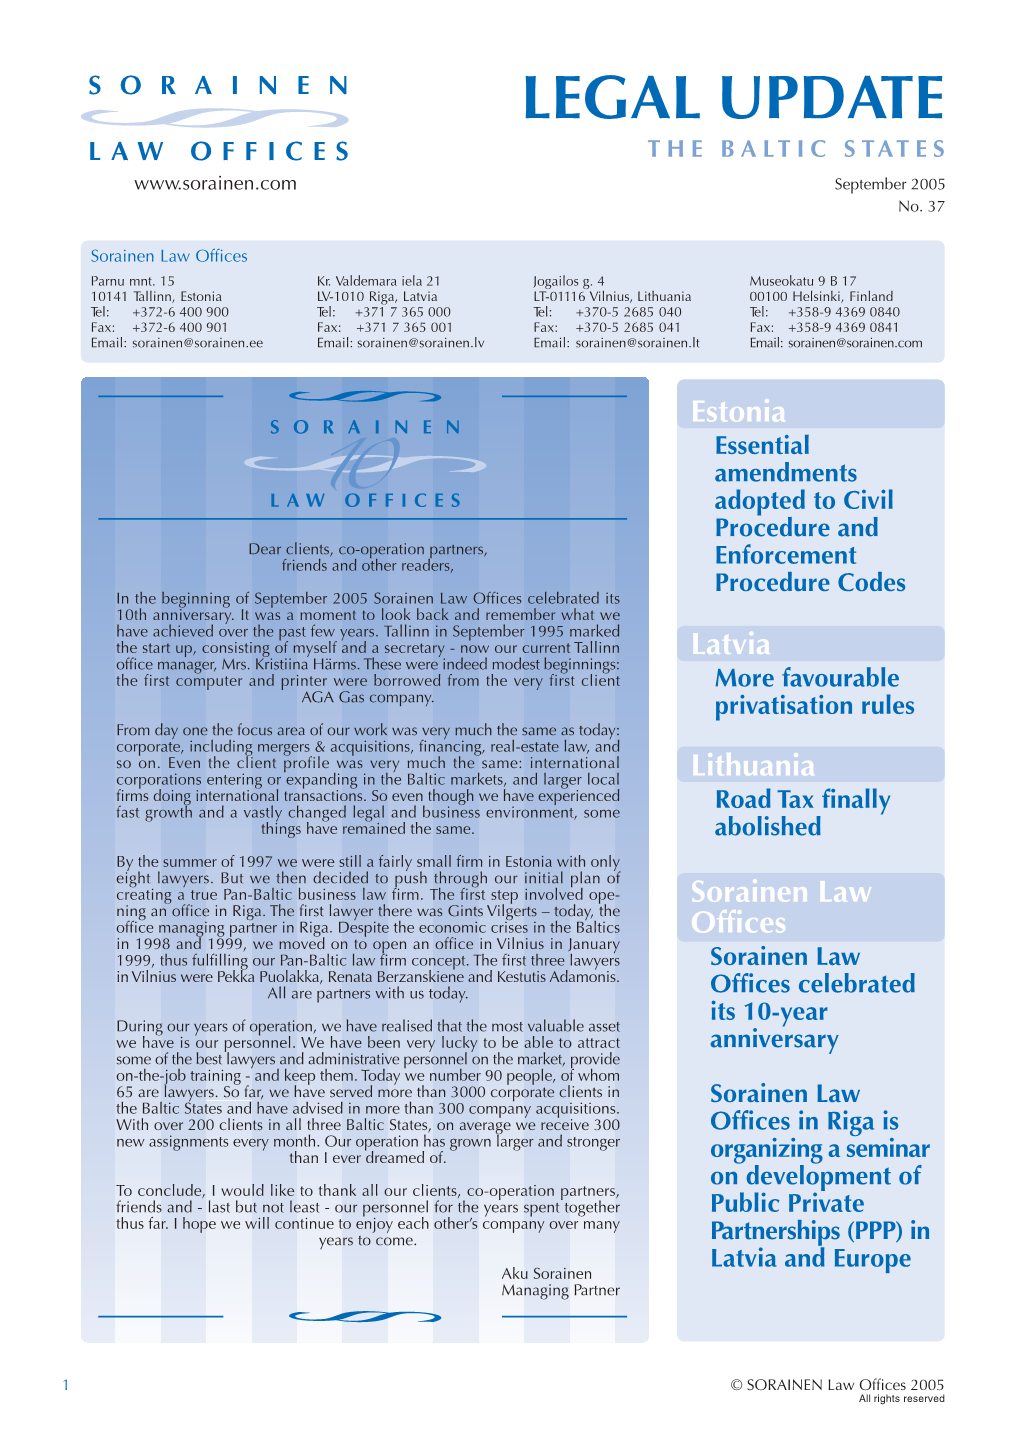 LEGAL UPDATE the BALTIC STATES September 2005 No